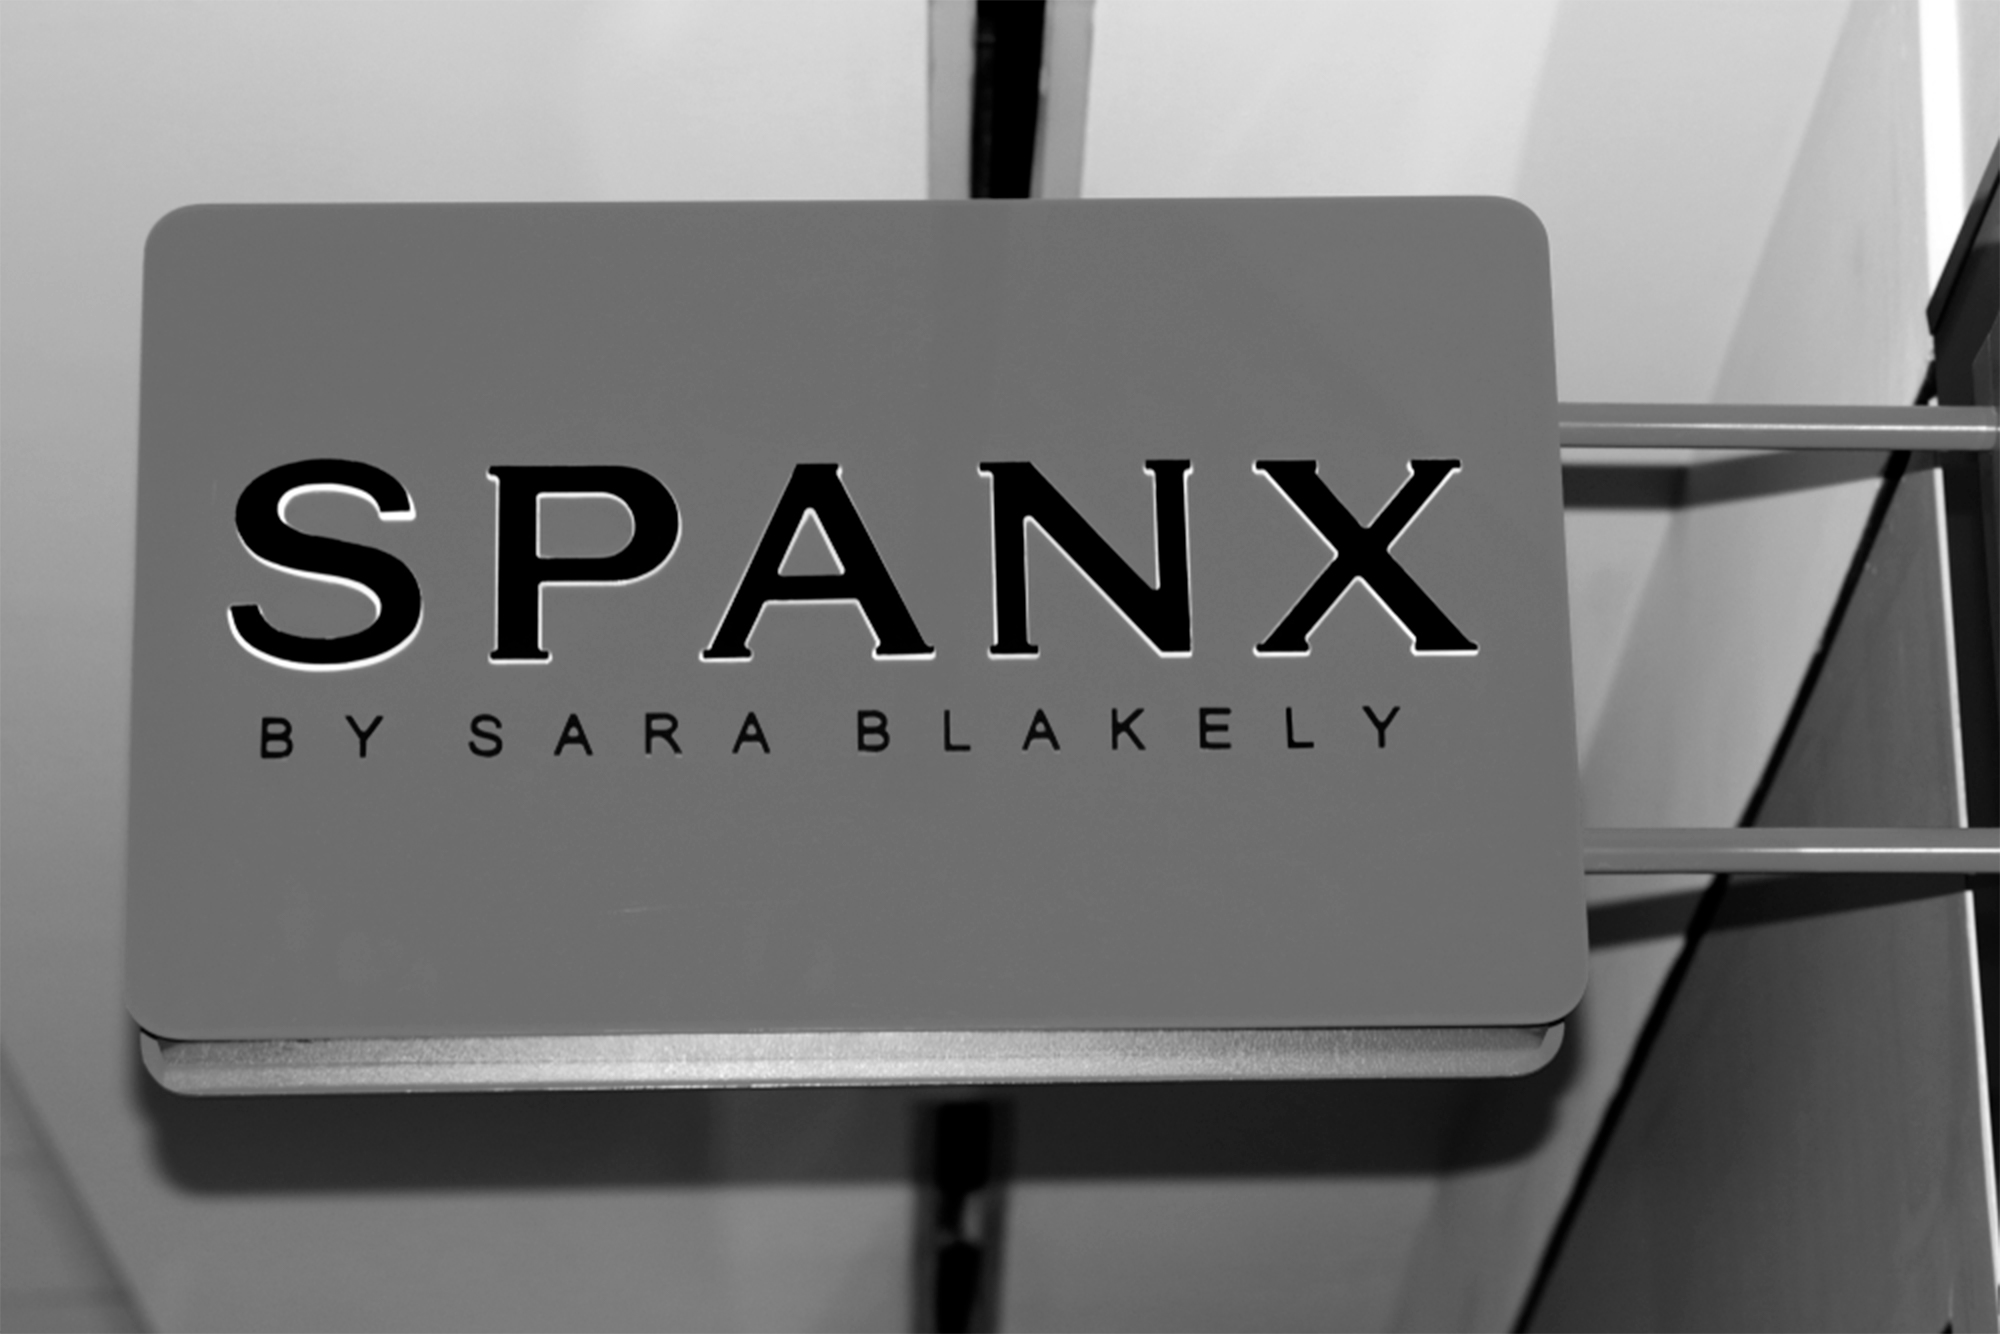 Spanx is the number one coolest office in the world today